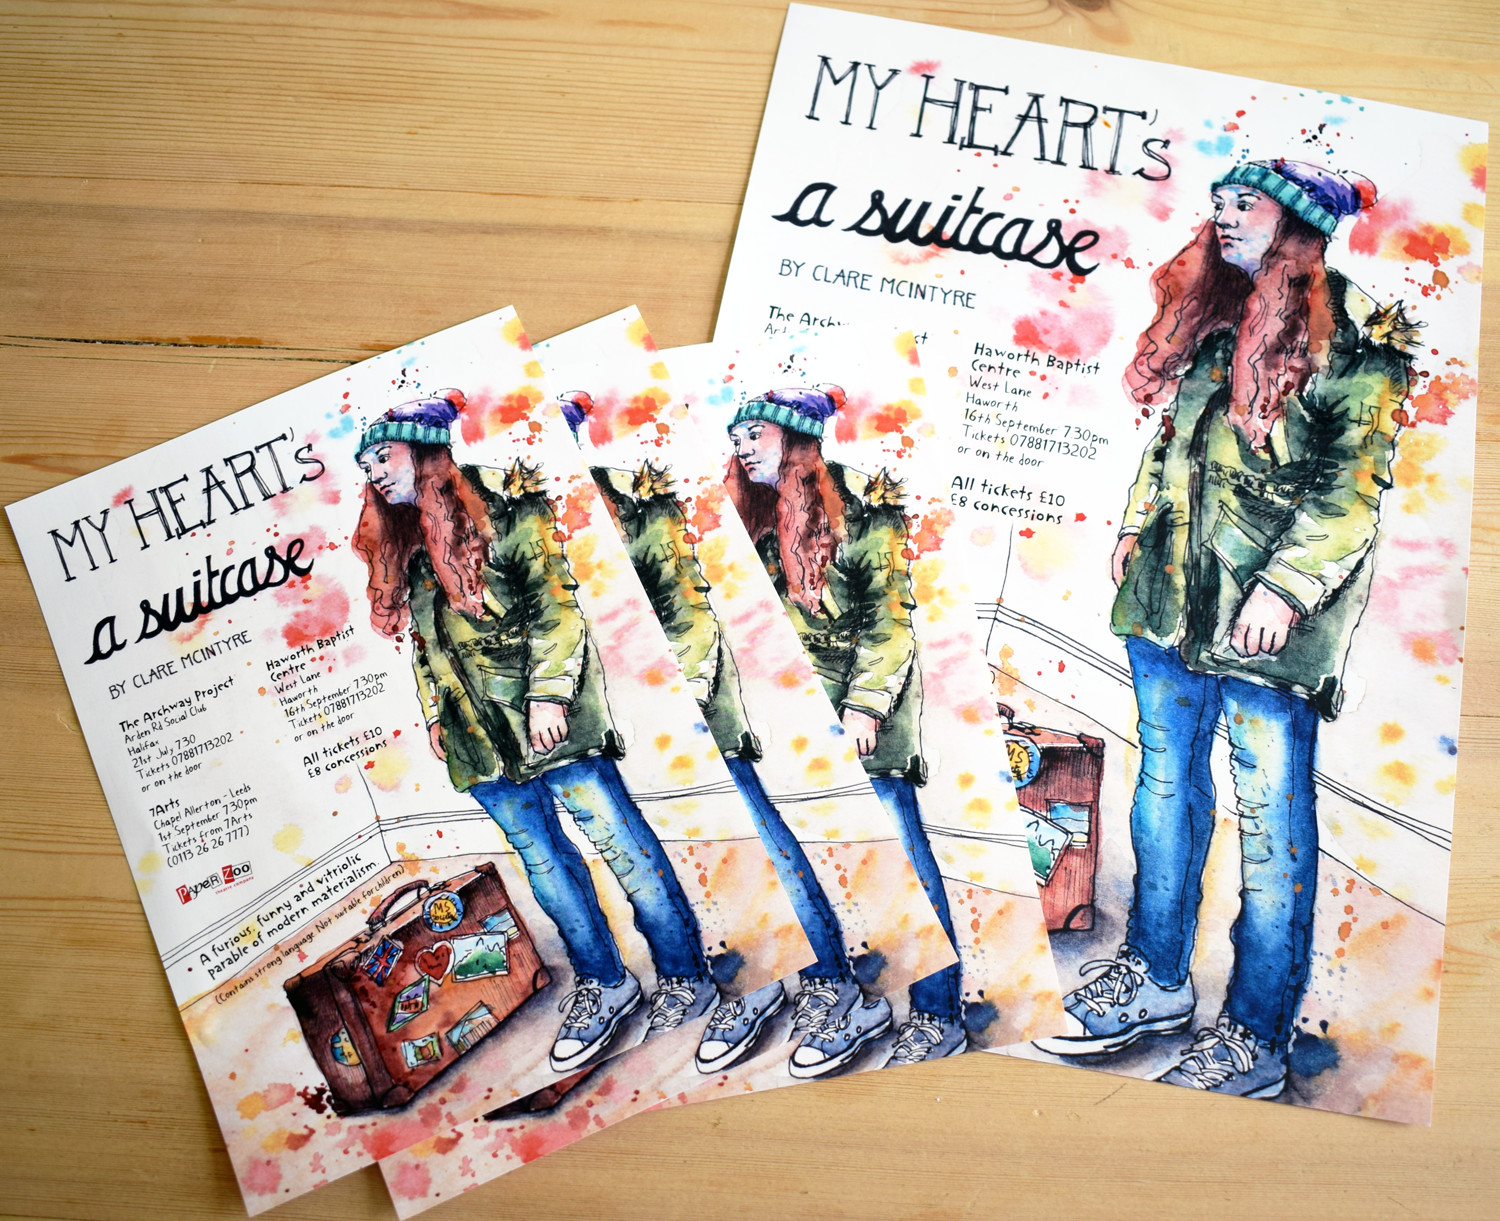 Theatre poster illustrations by Sophie Peanut. Leaflets and posters for My Heart's a suitcase by Clare McIntyre